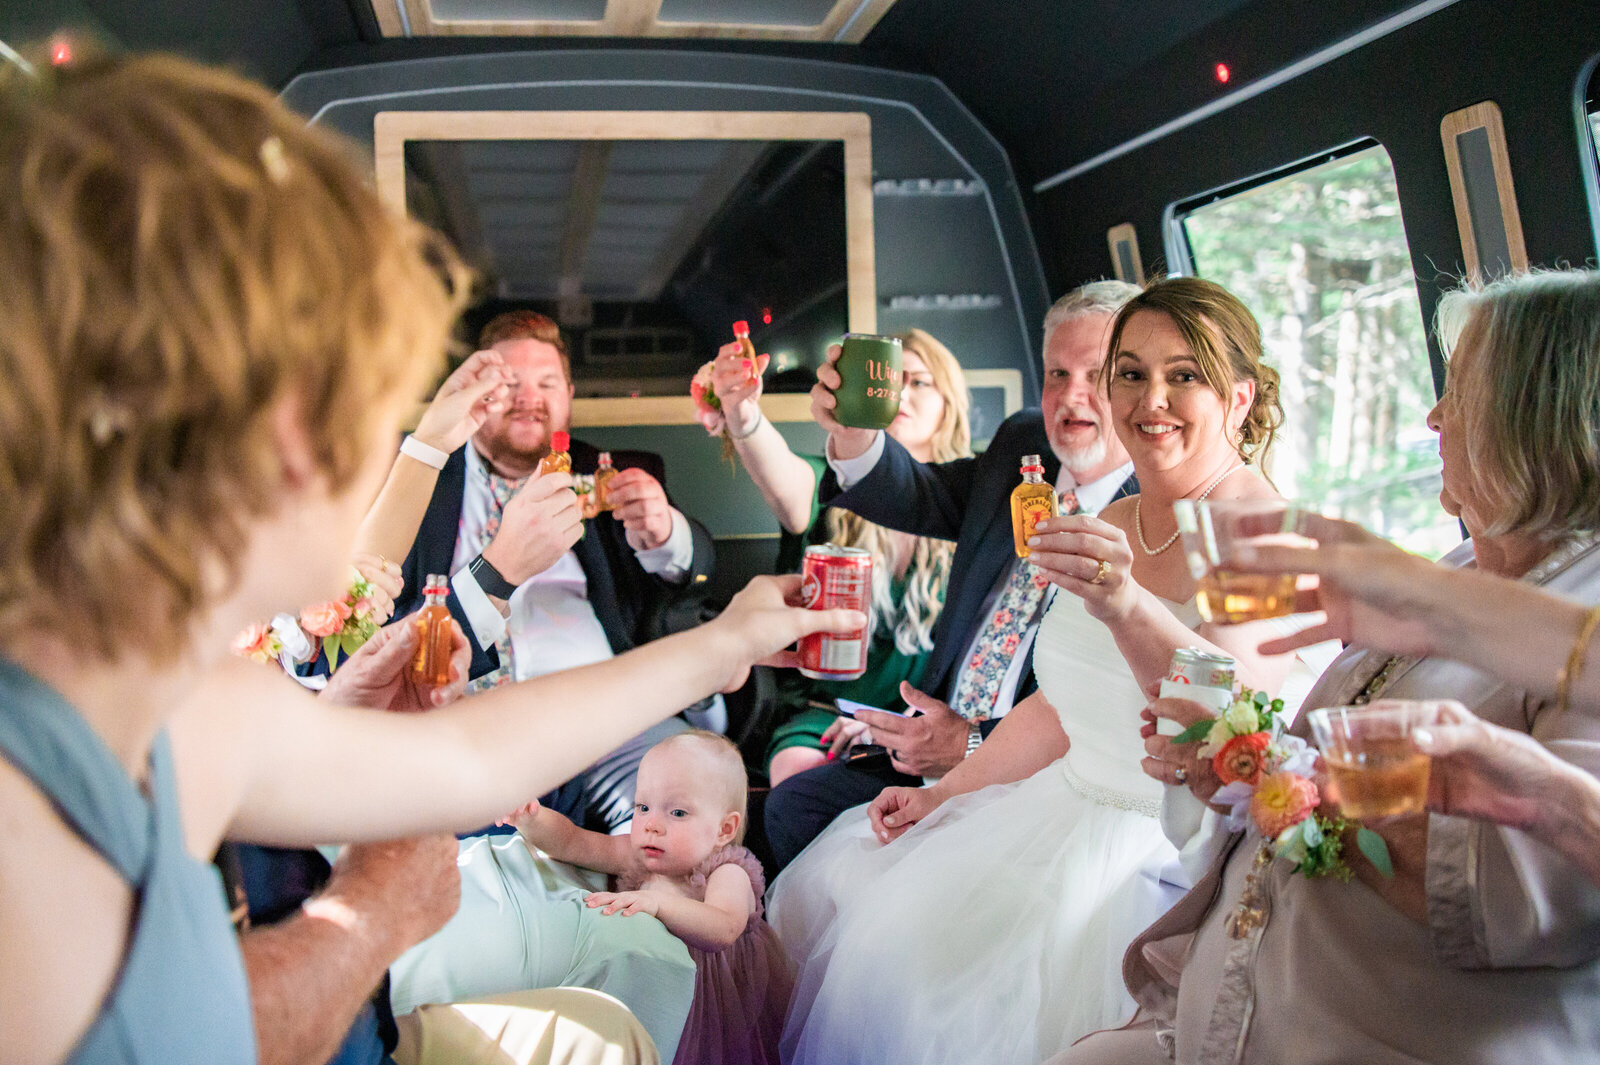 Party bus in jackson hole taking wedding party around the park for photos